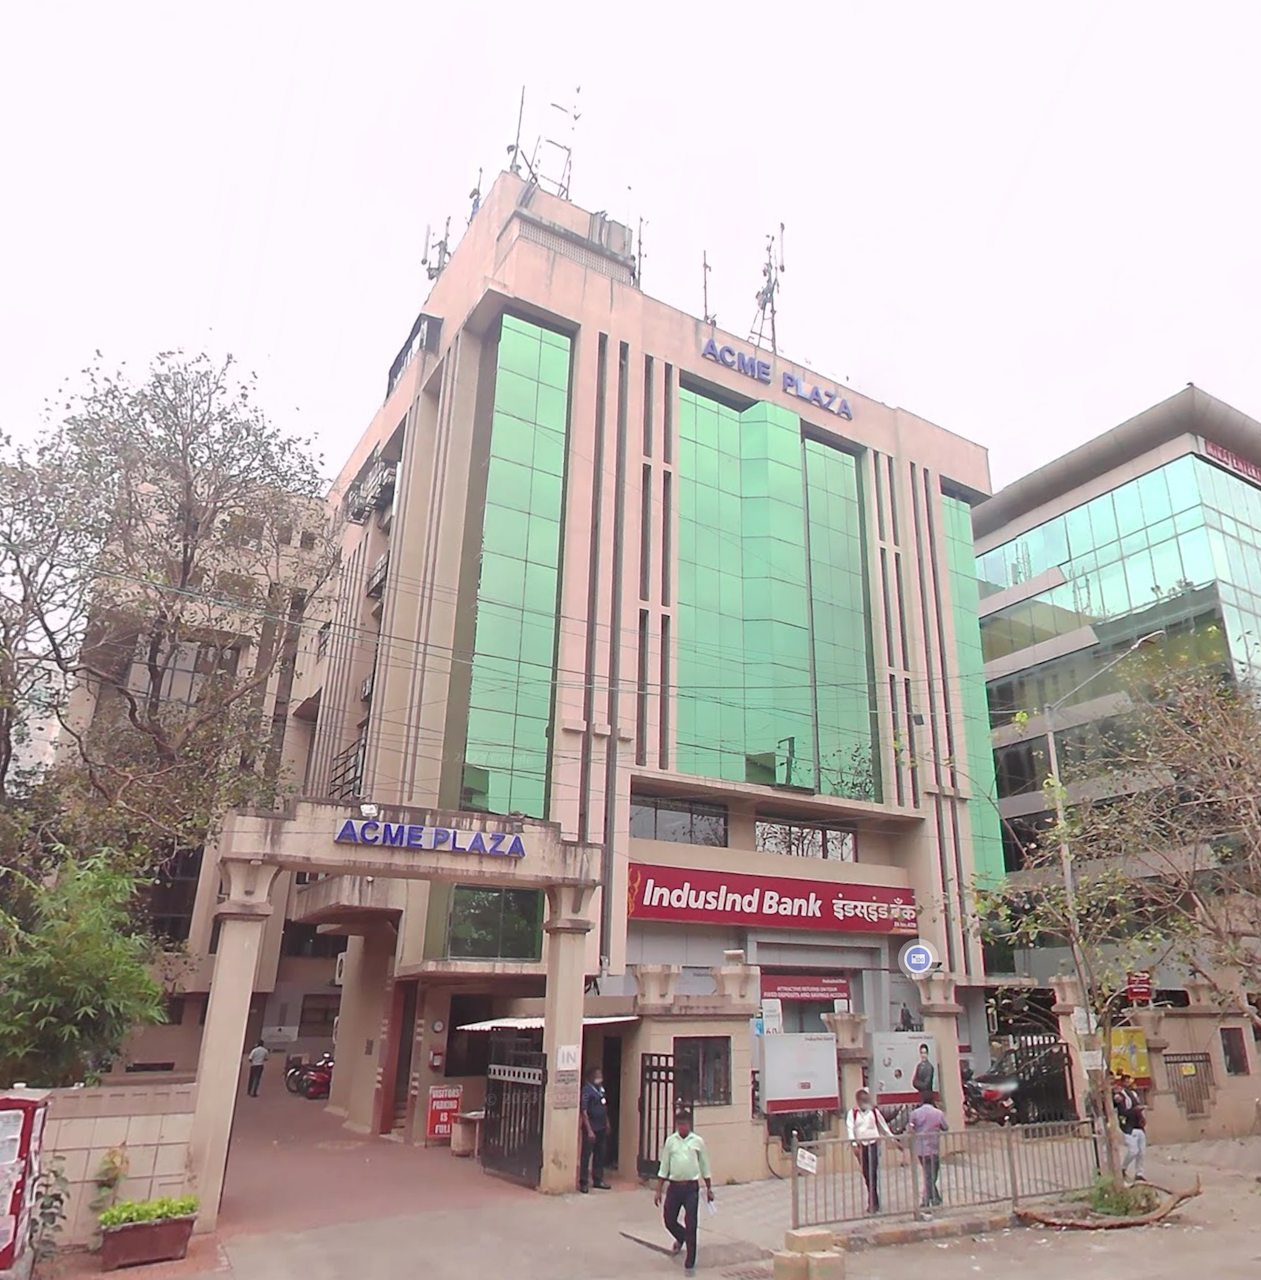 Office Space Office on Rent in Andheri East - Acme Plaza